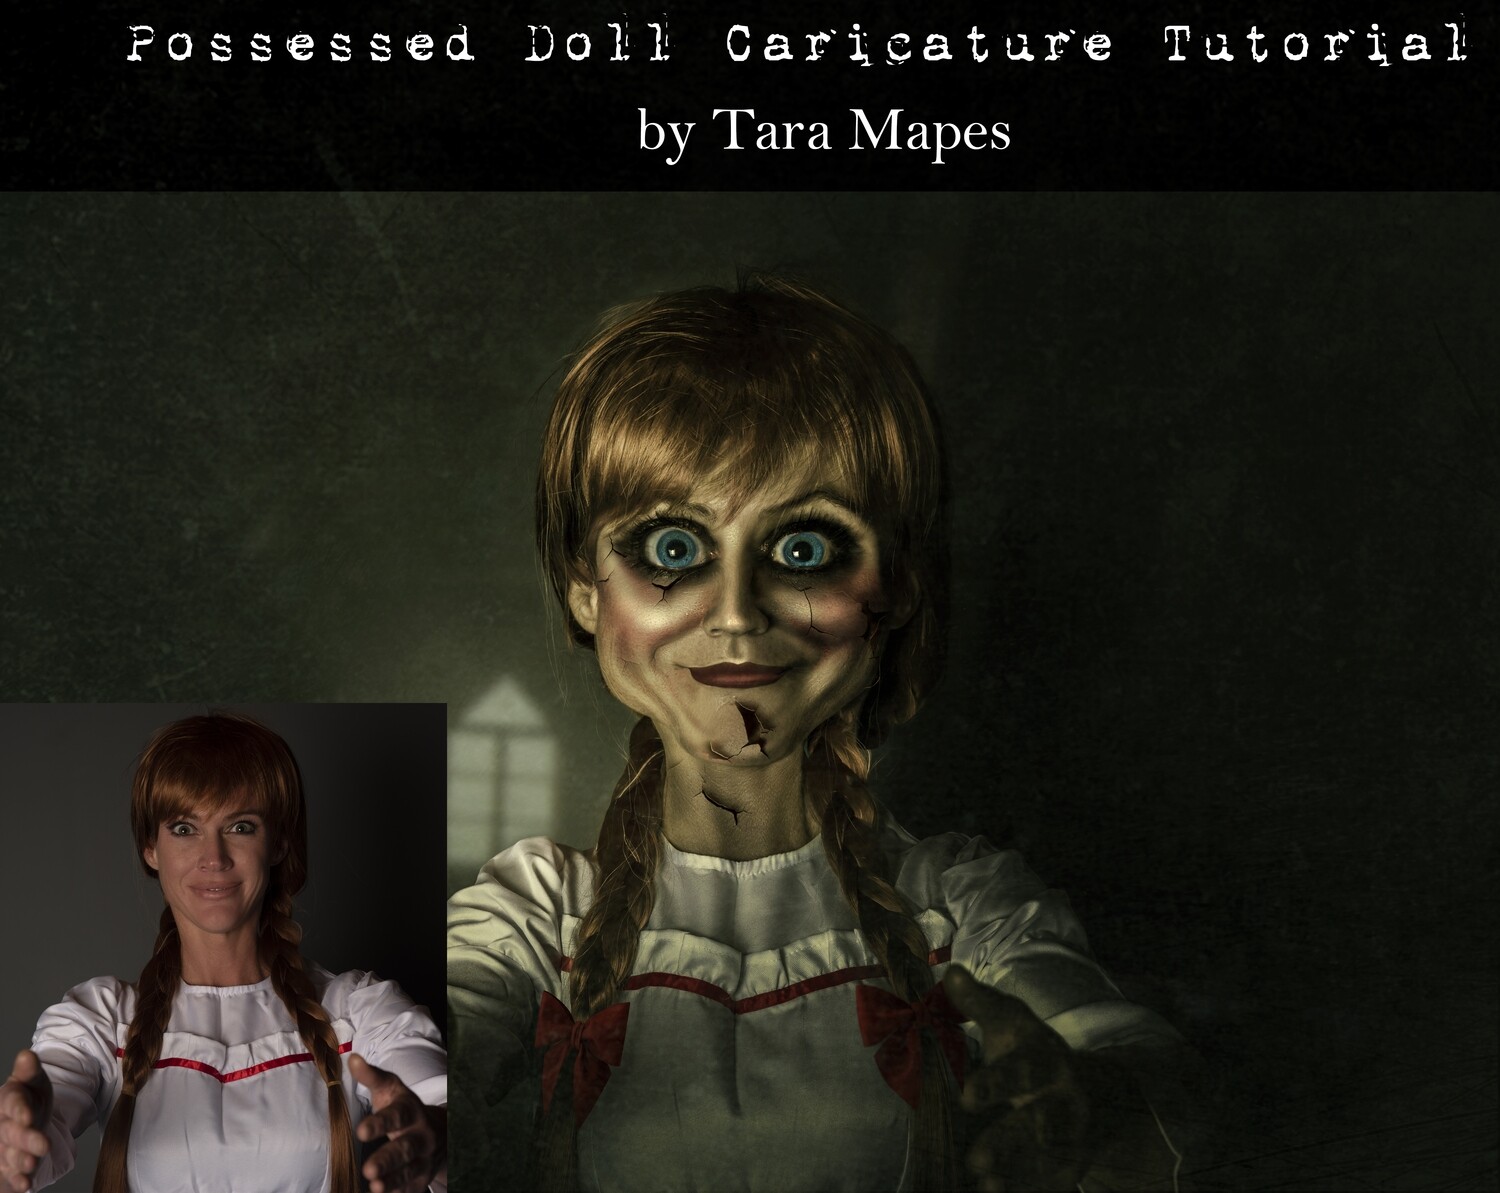 Annabelle Caricature Tutorial by Tara Mapes - Photomanipulation and Surreal Editing Tutorial